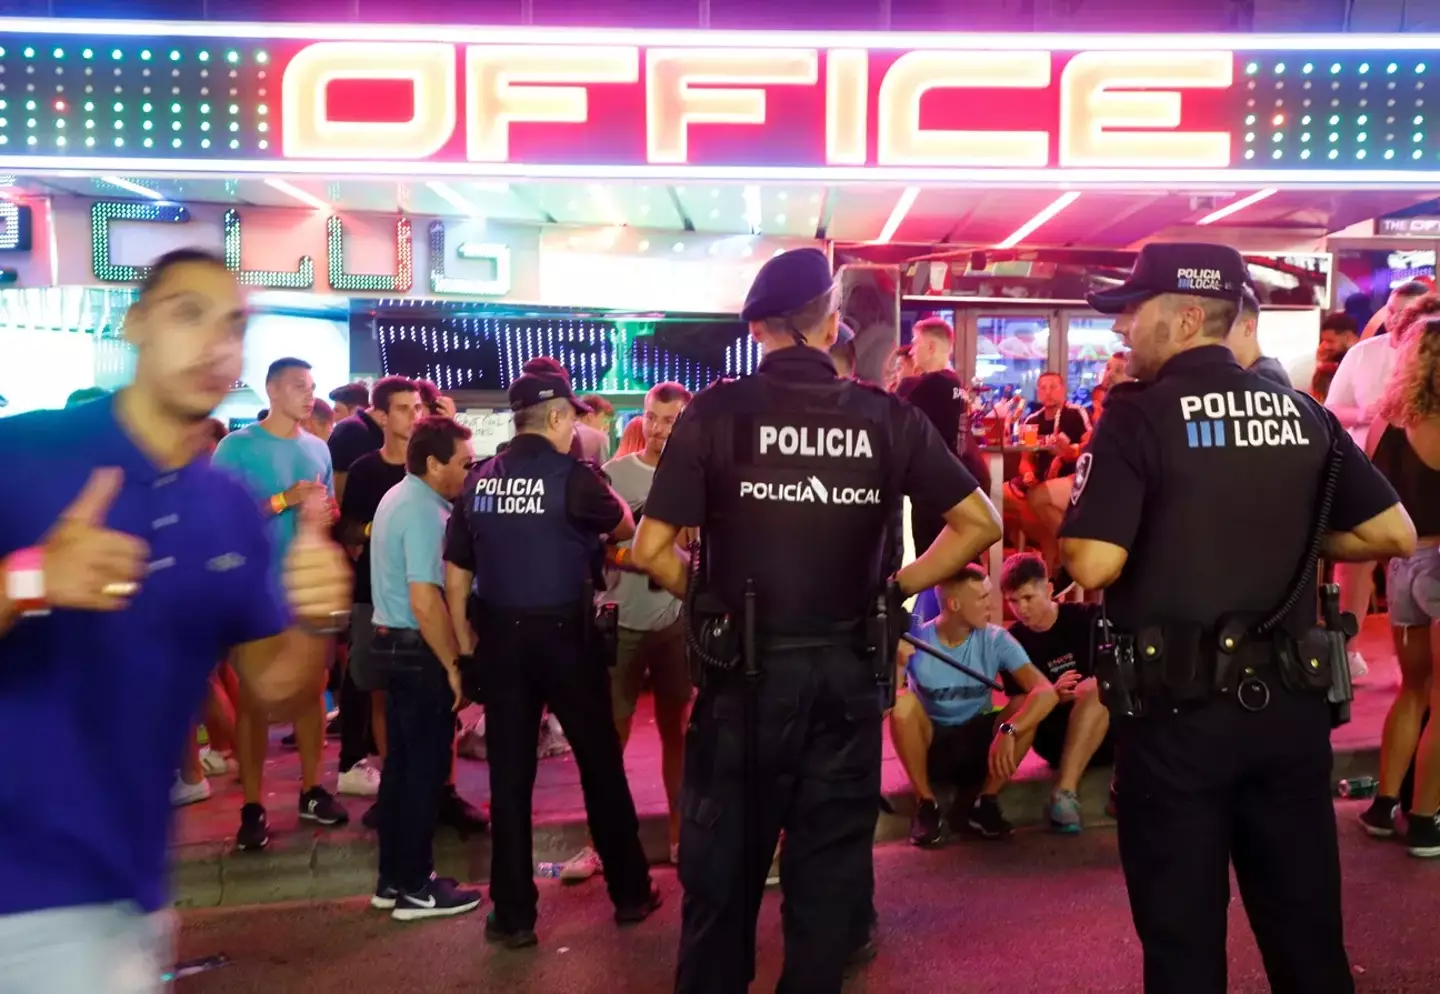 Spain is continuing its crackdown on booze tourism.